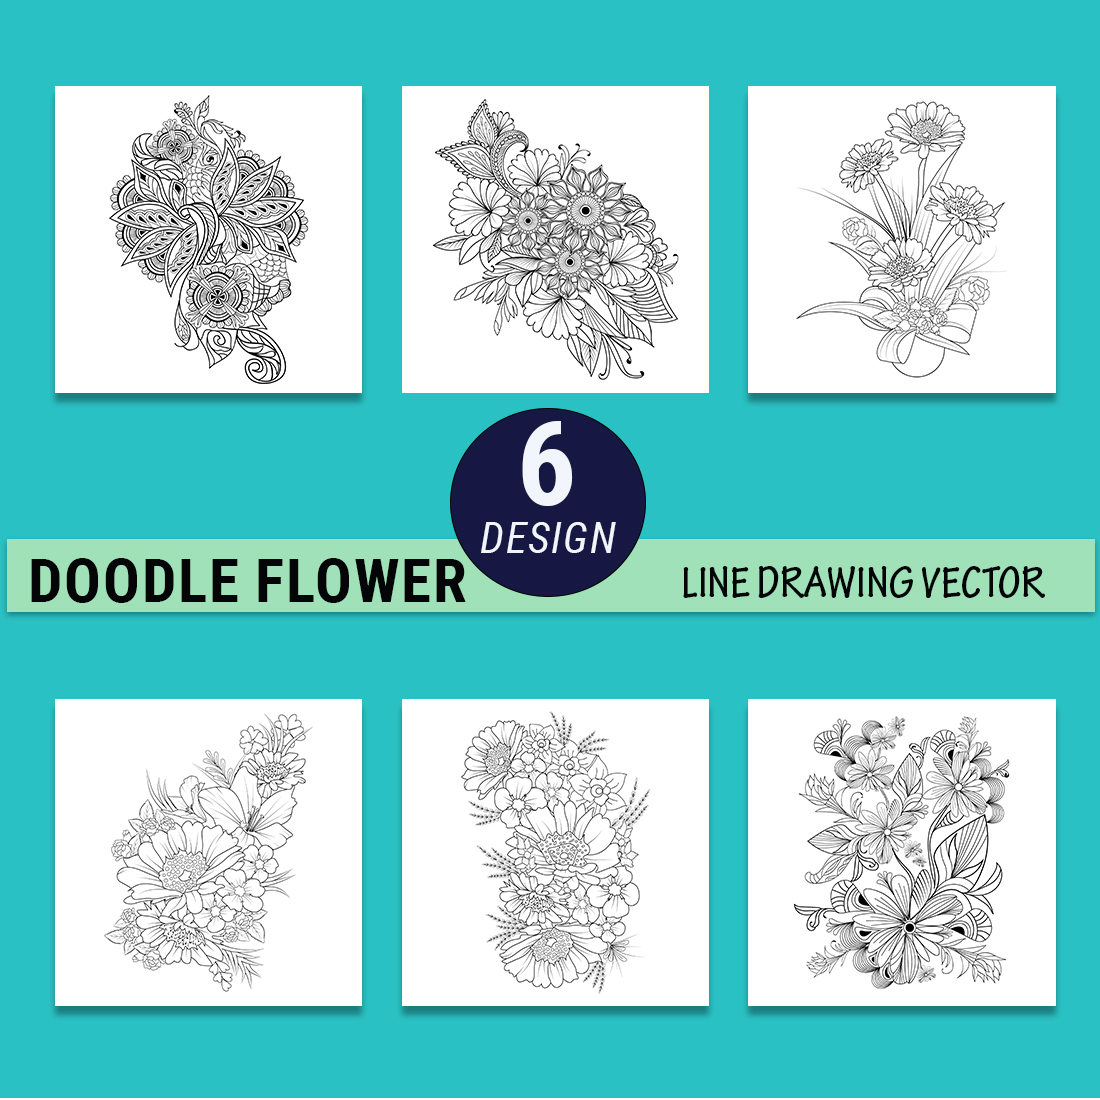 zentangle art tattoos, easy flower doodle illustration, doodle flower drawing, simple bouquet doodle flower drawing preview image.